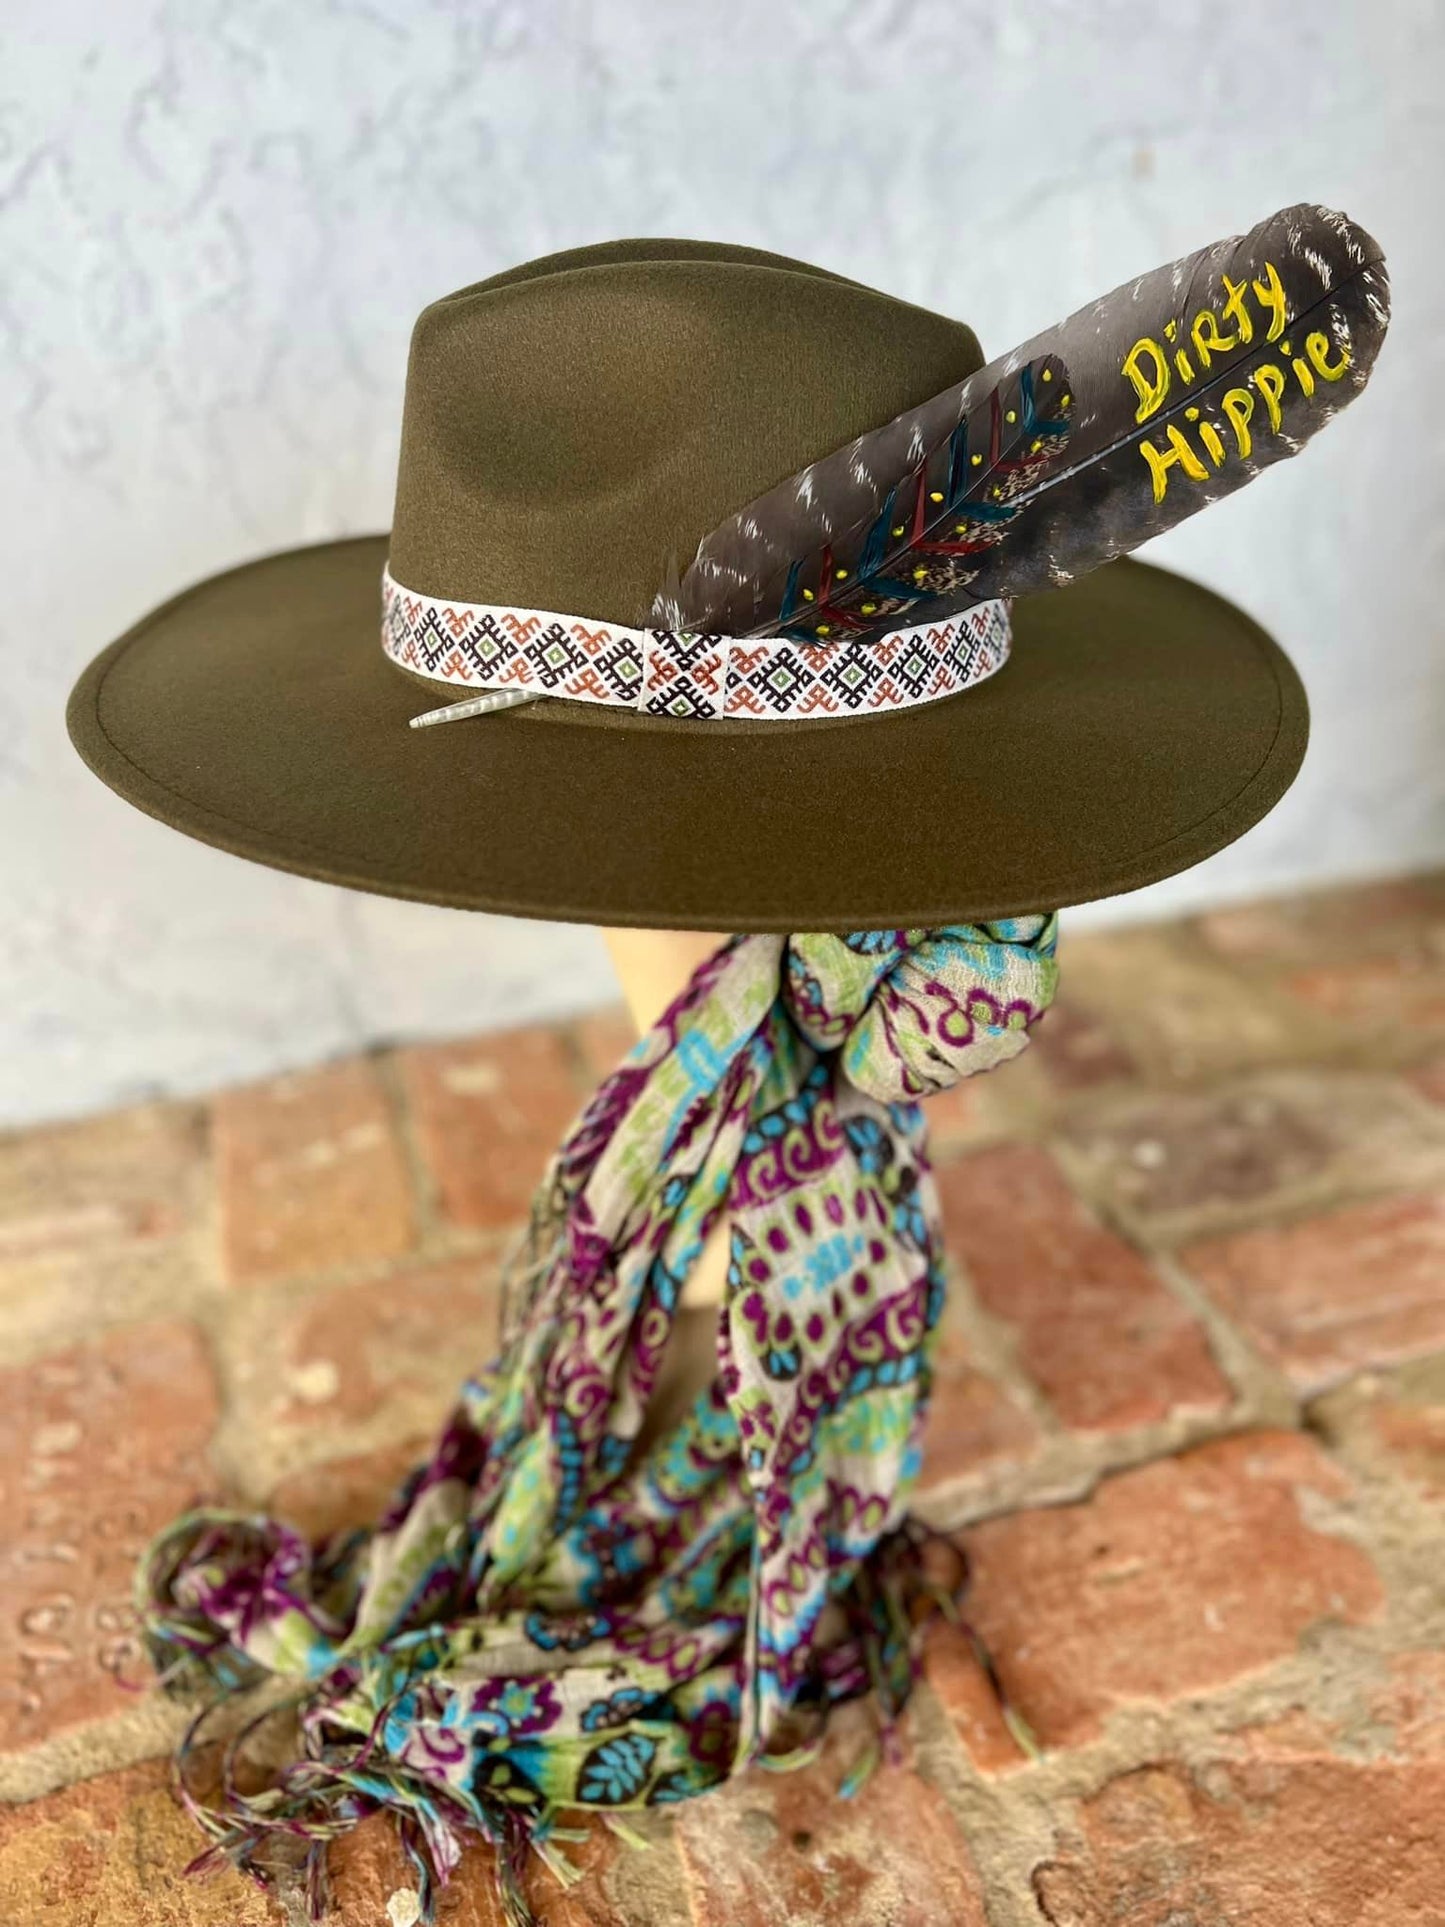 The Dirty Hippie Hat